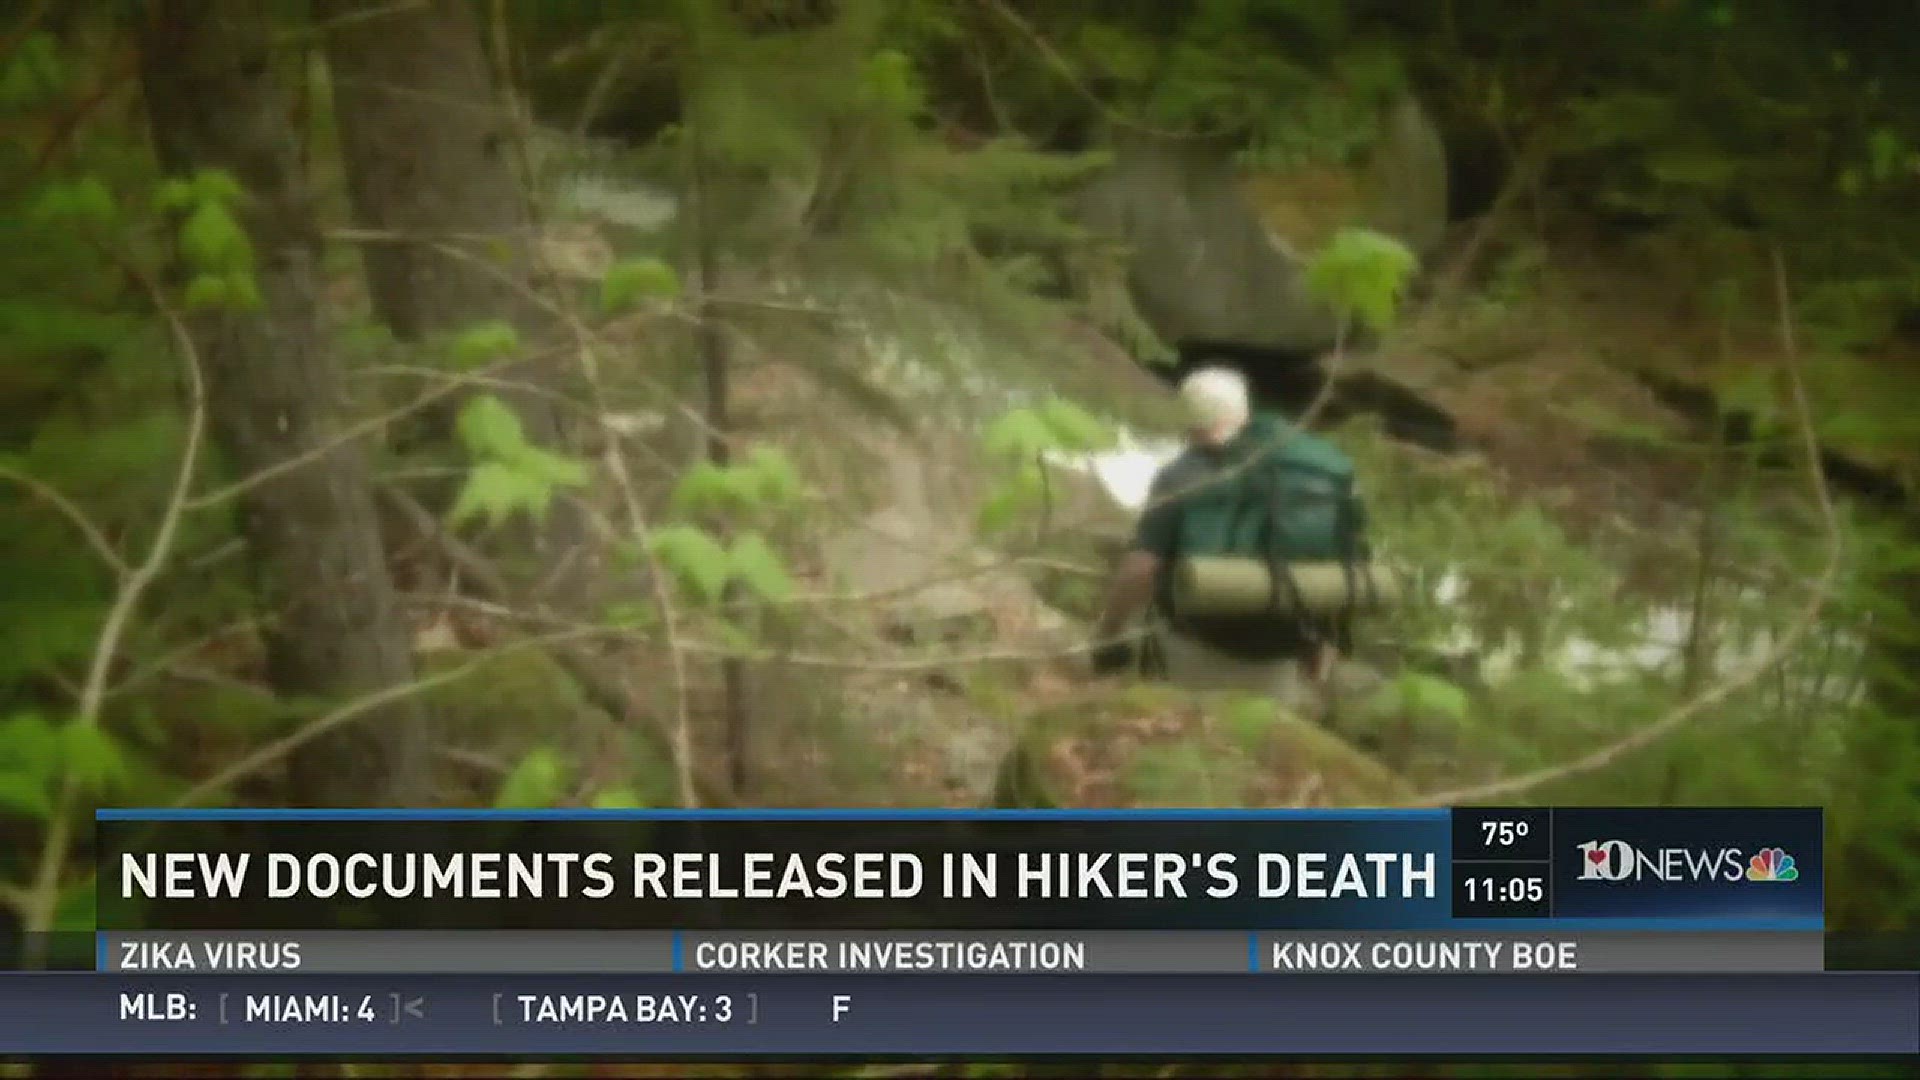 Lost Hiker Was Two Miles From Appalachian Trail When She Died